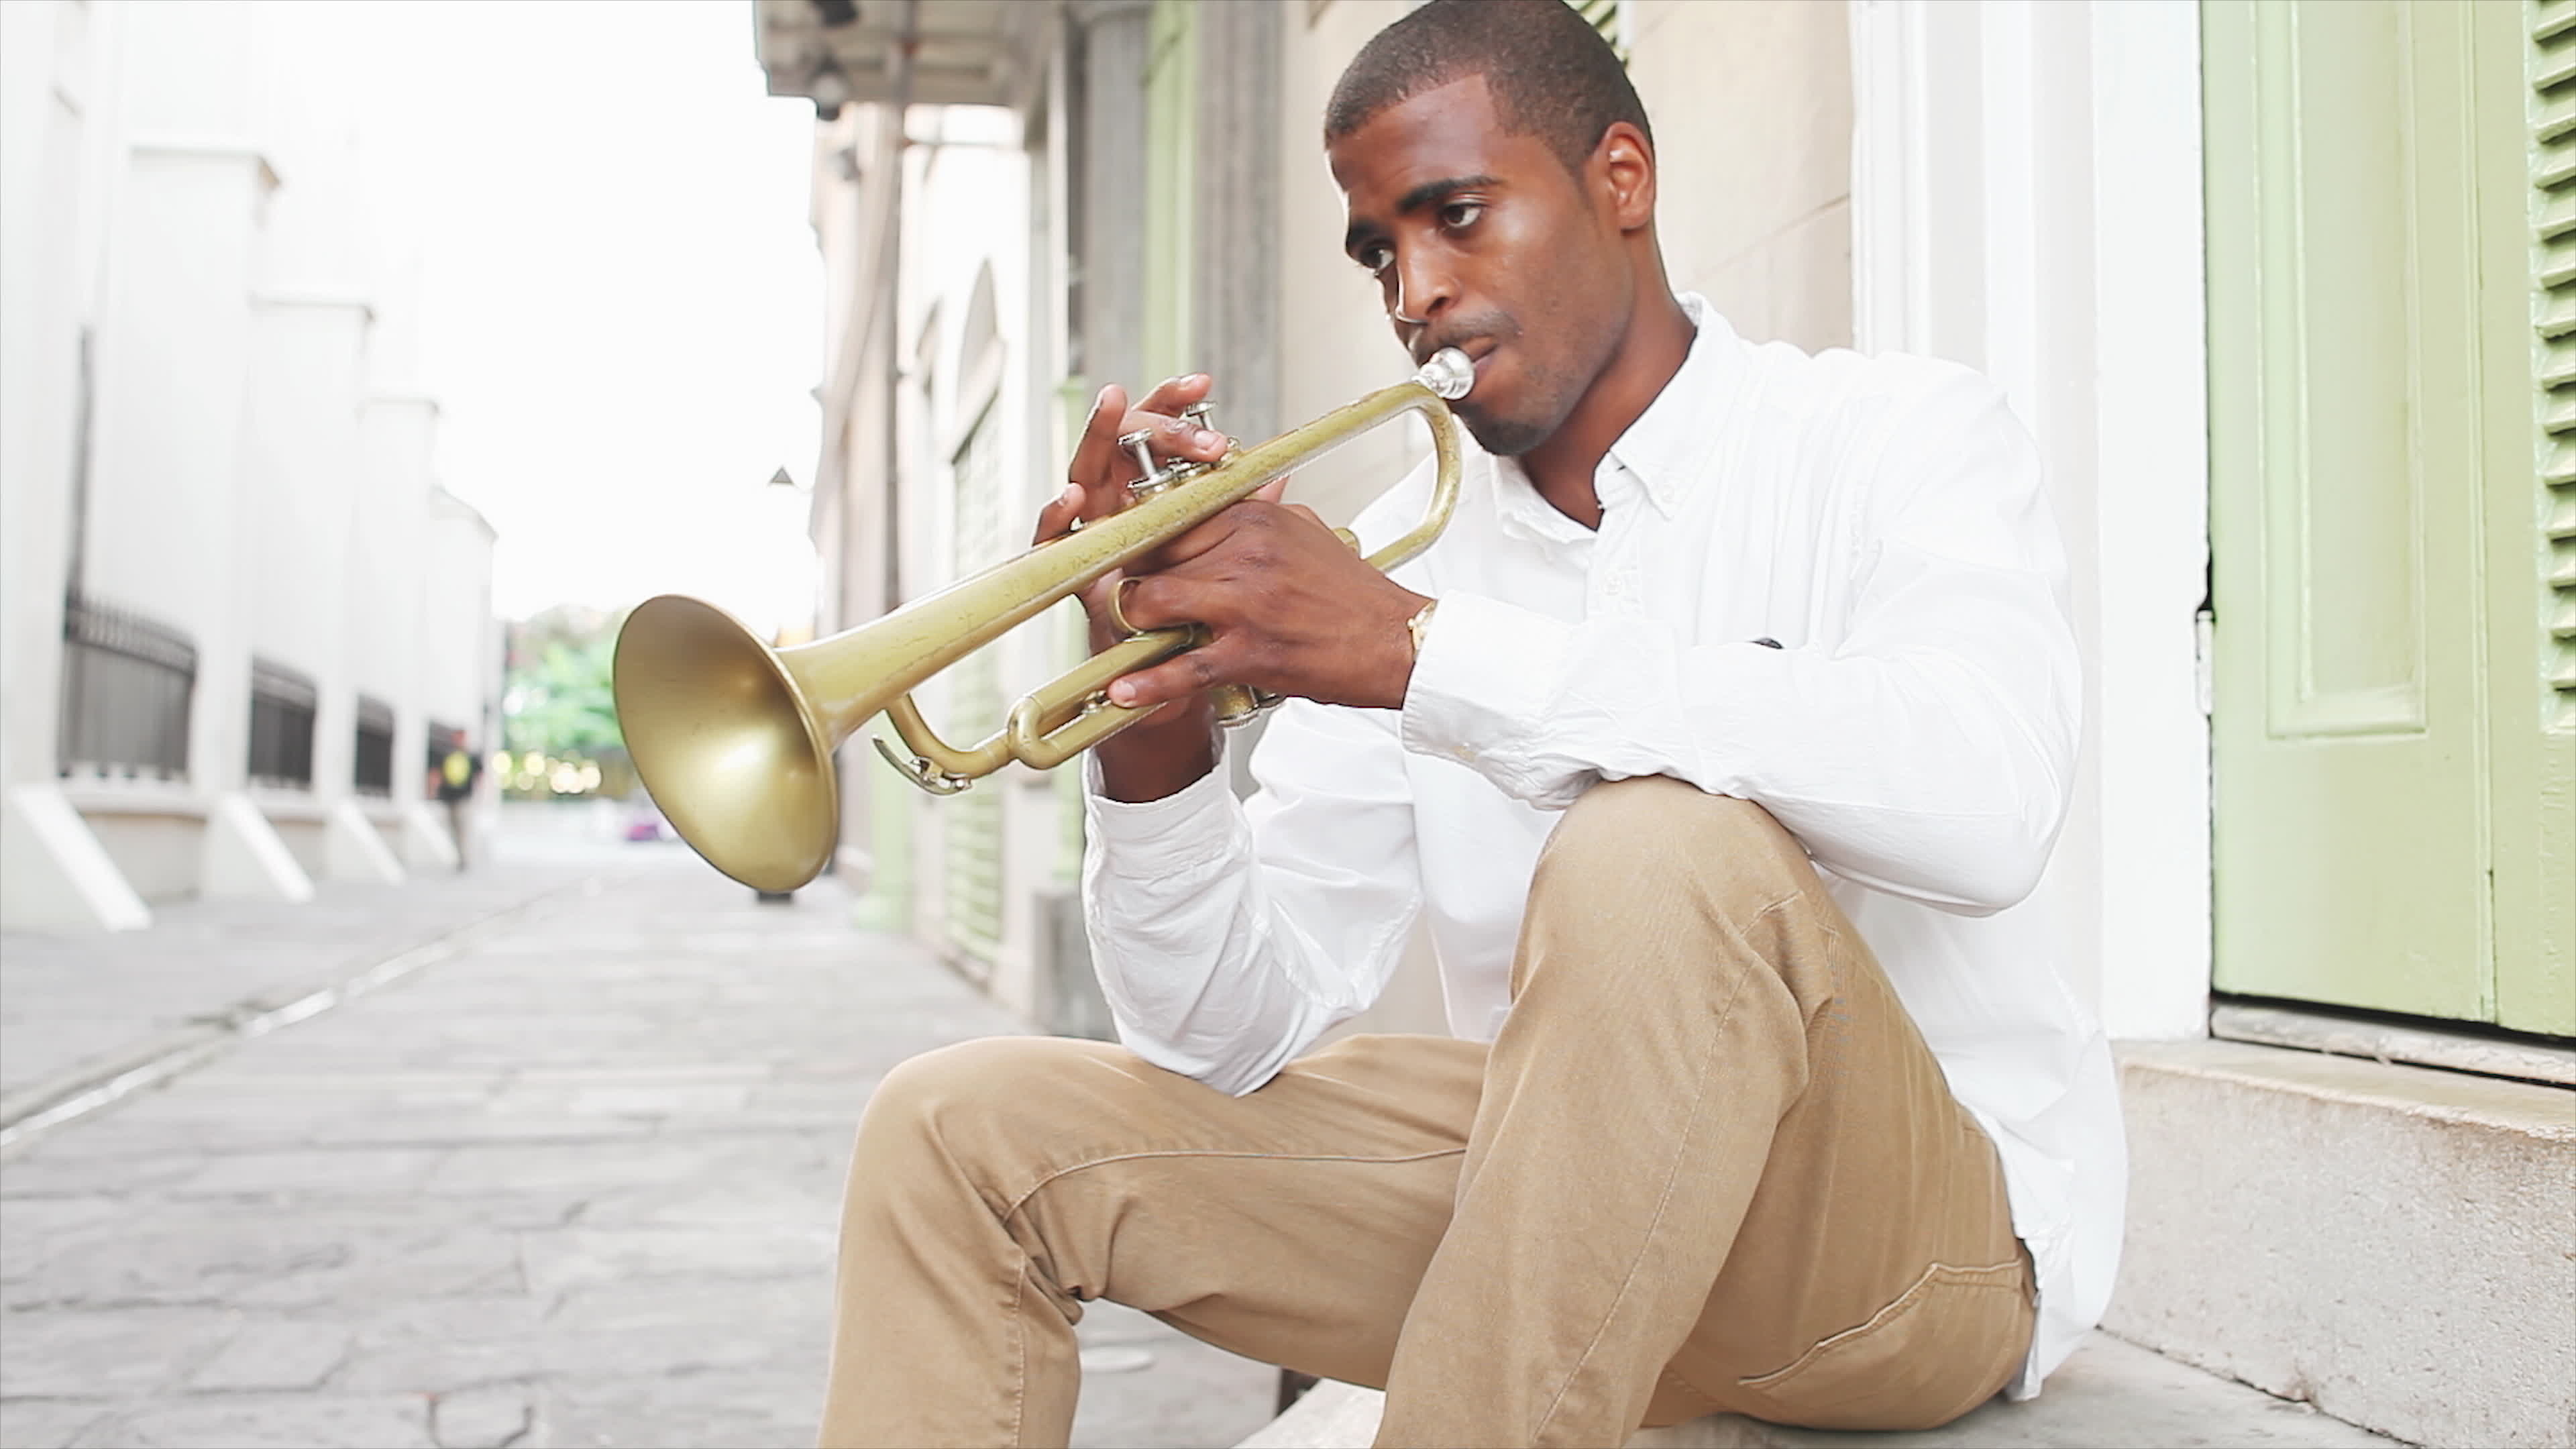 Trumpet: Family of brass wind instruments with a powerful, penetrating tone, Street musician. 3840x2160 4K Wallpaper.